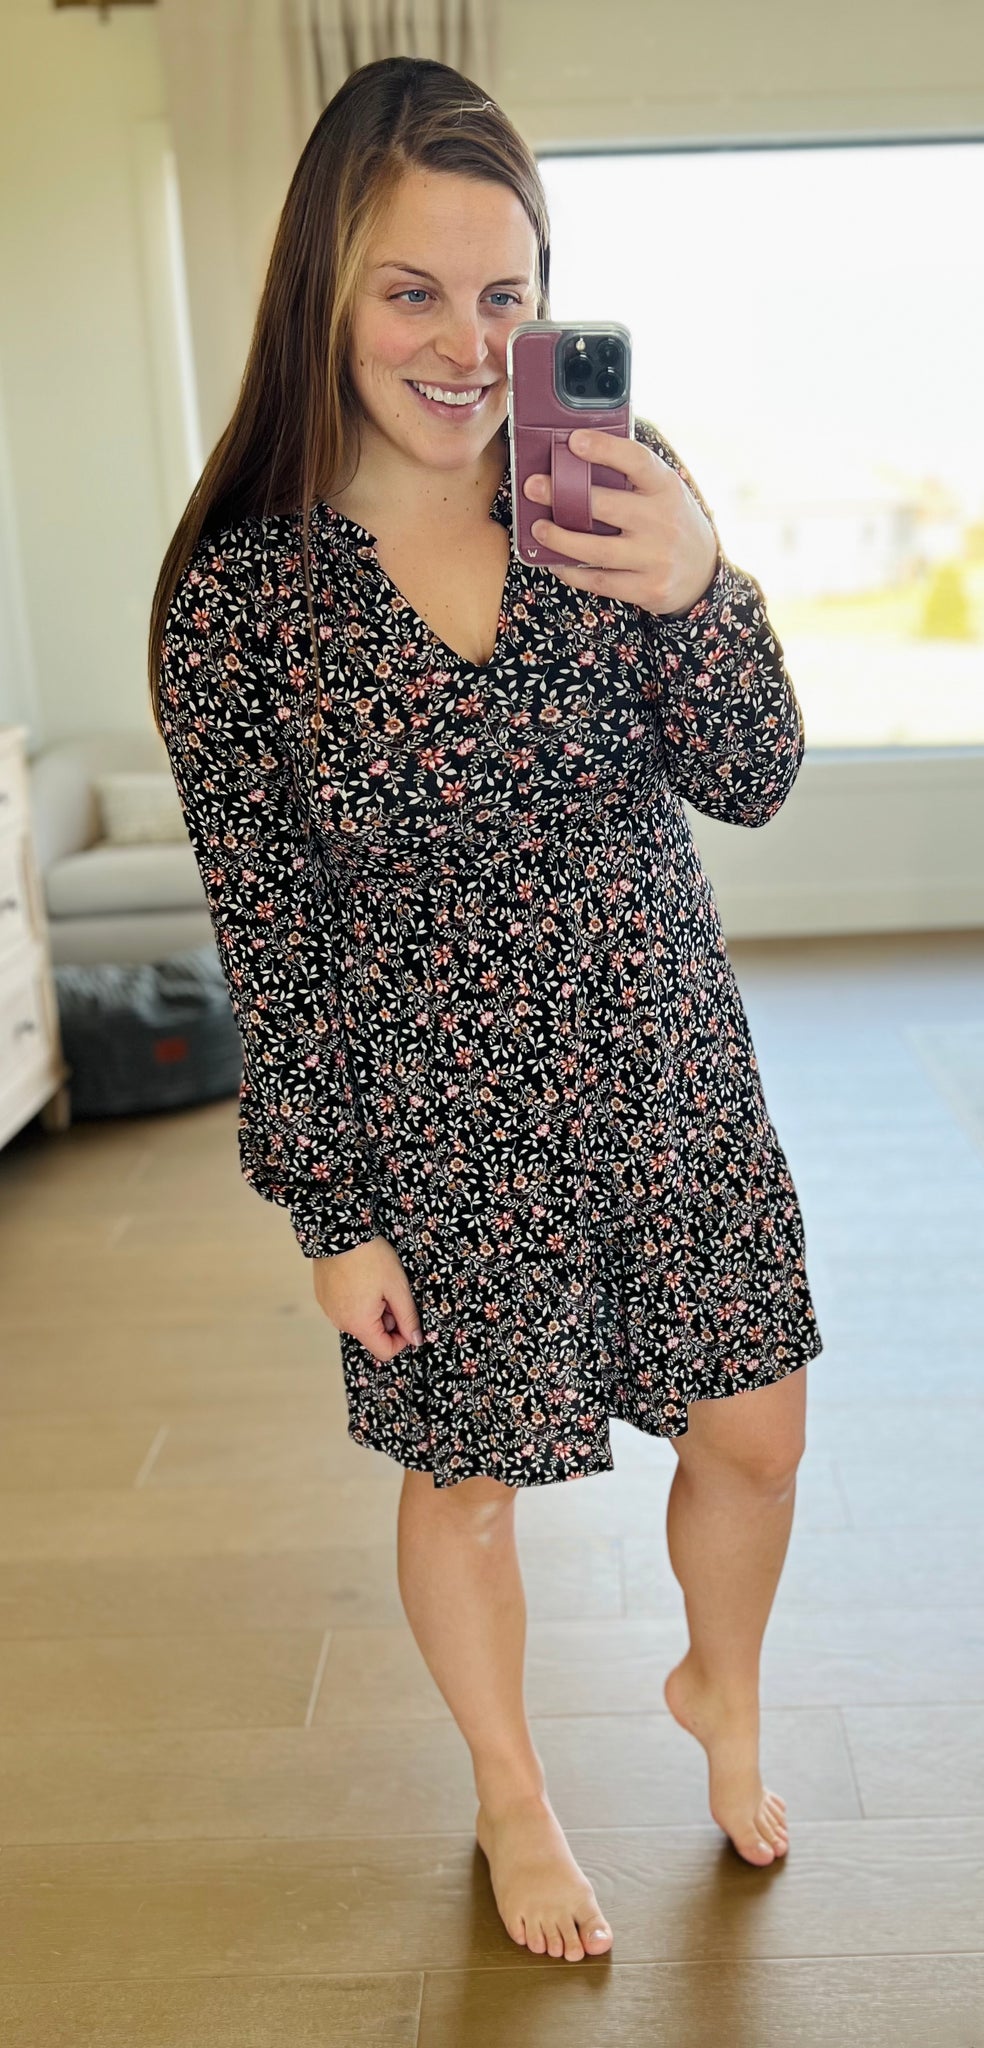 The Whimsical Floral Dress